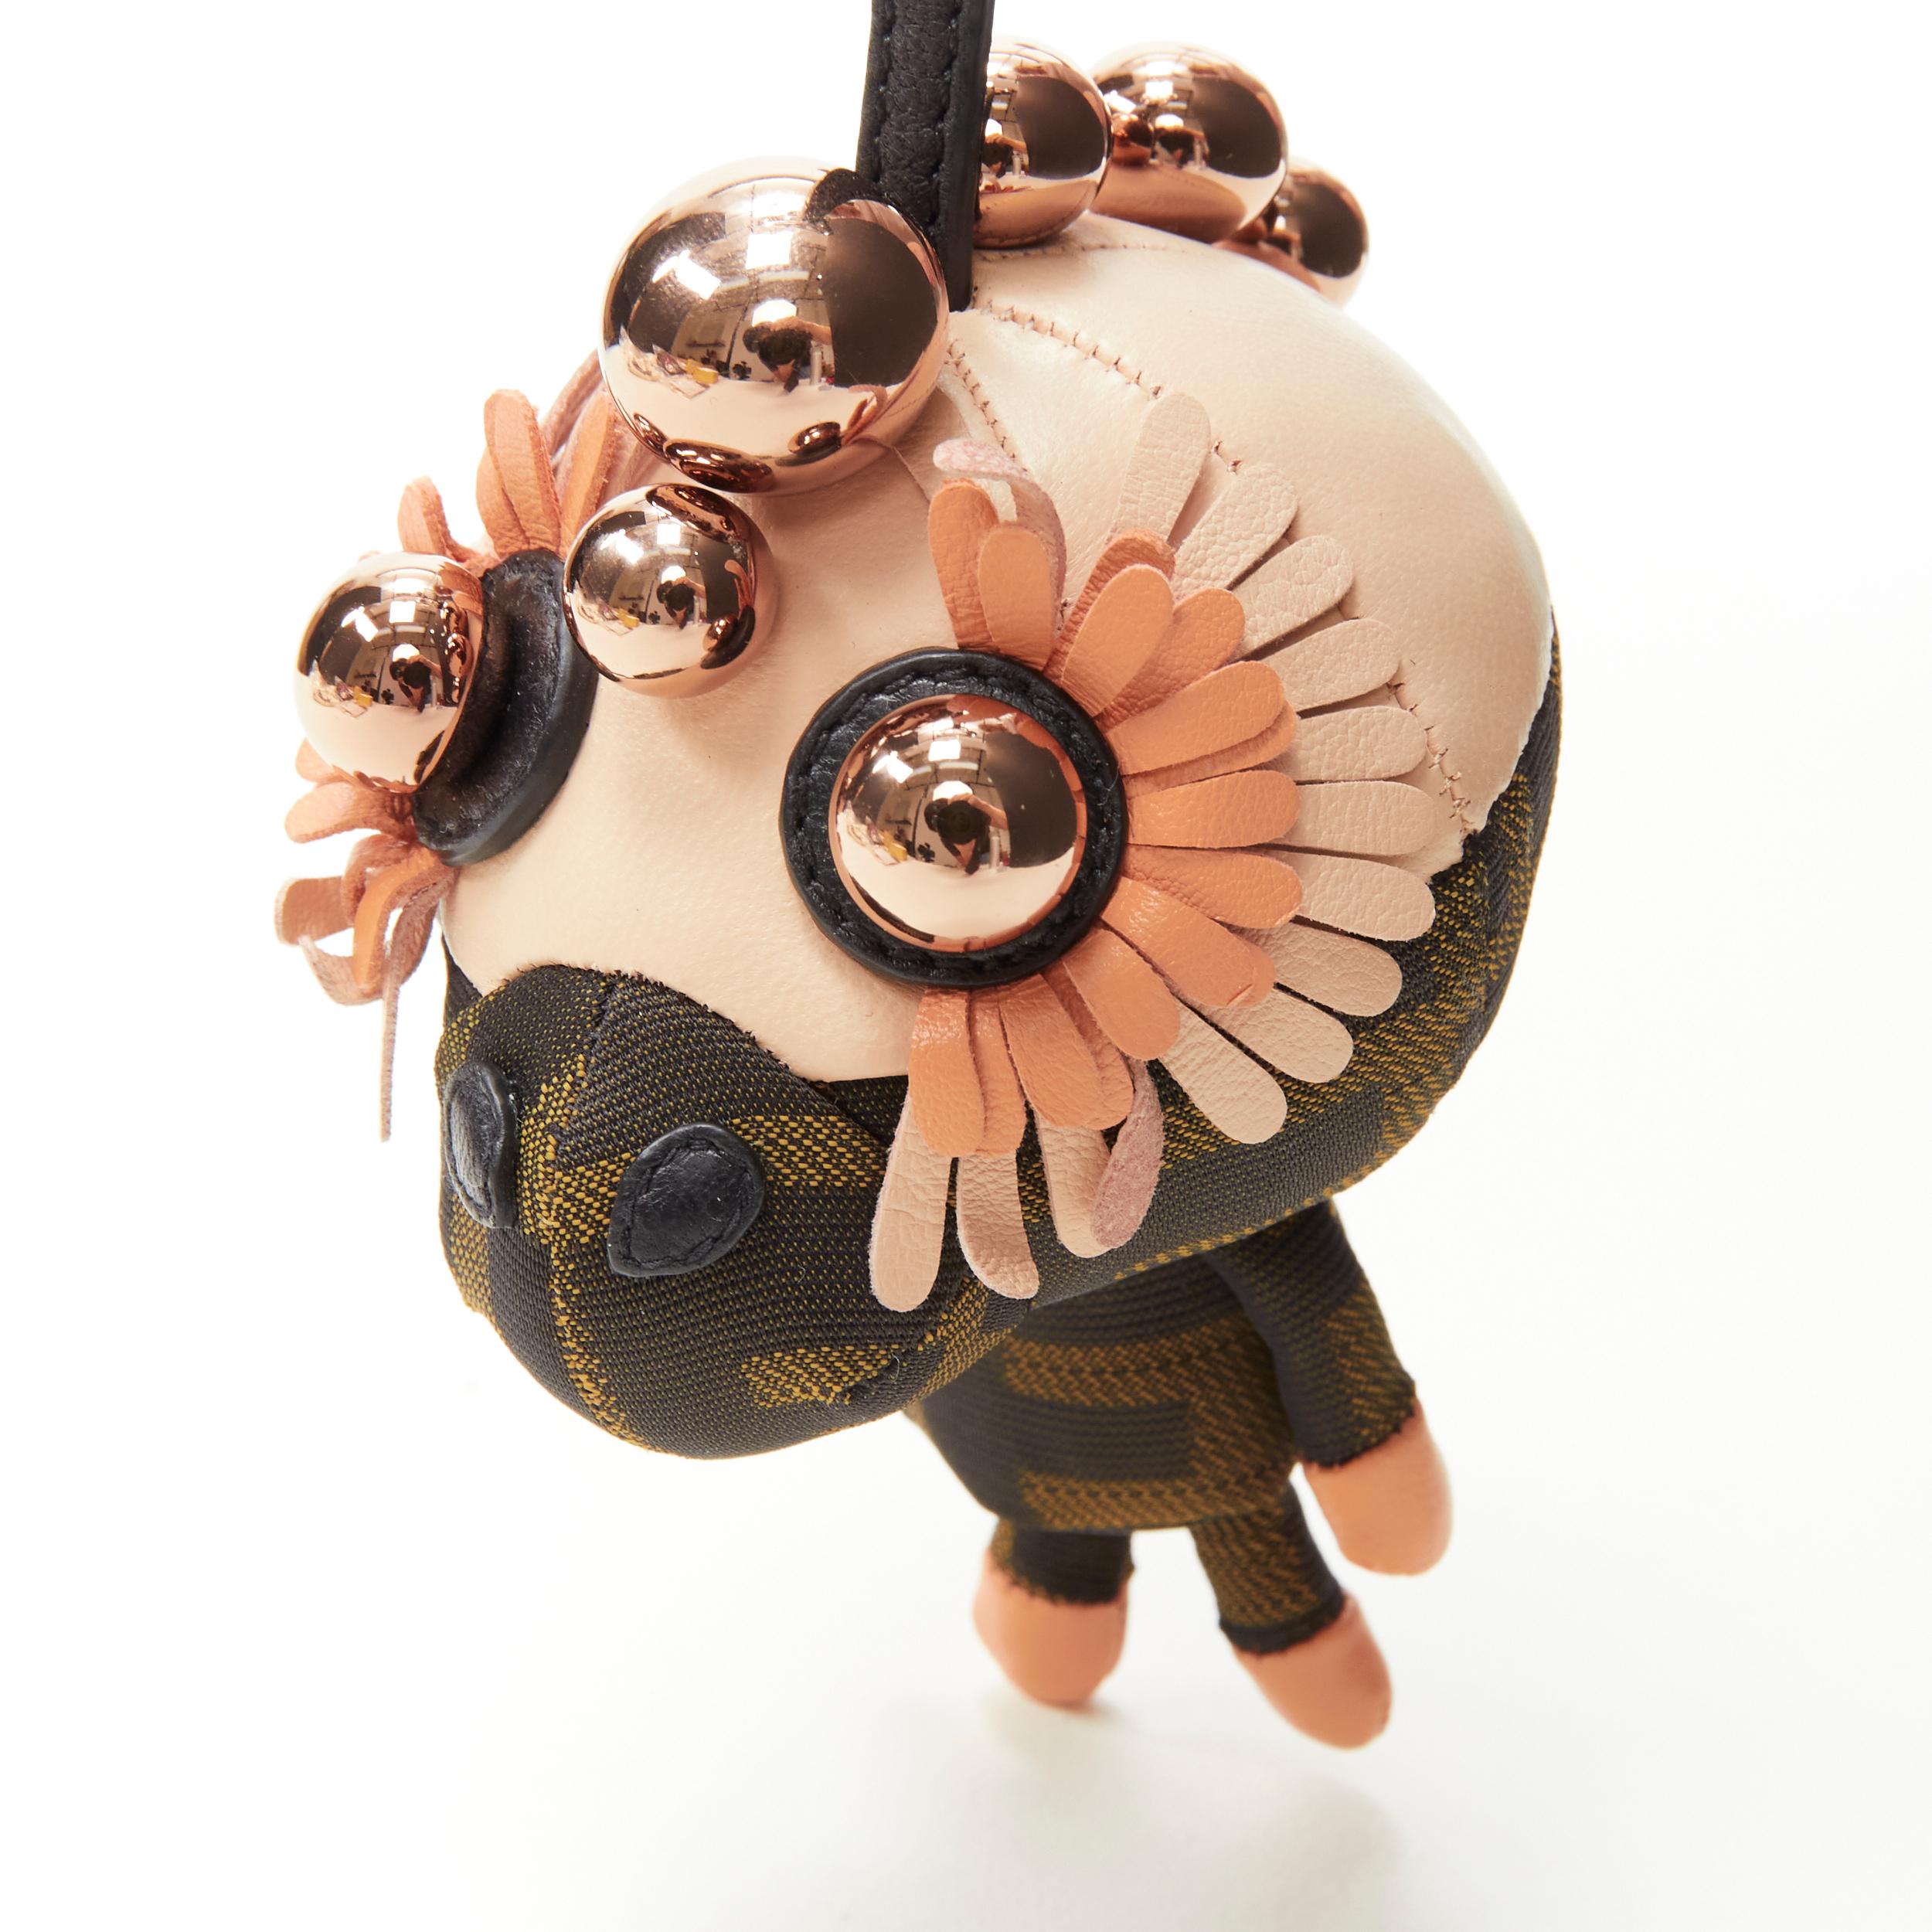 FENDI Space Monkey Zucca FF monogram floral rose gold stud keyring bag charm 
Reference: ANWU/A00117 
Brand: Fendi 
Collection: Space Monkey 
Material: Canvas 
Color: Brown 
Pattern: Monogram 
Closure: Clasp 
Extra Detail: Brown Zucca FF monogram